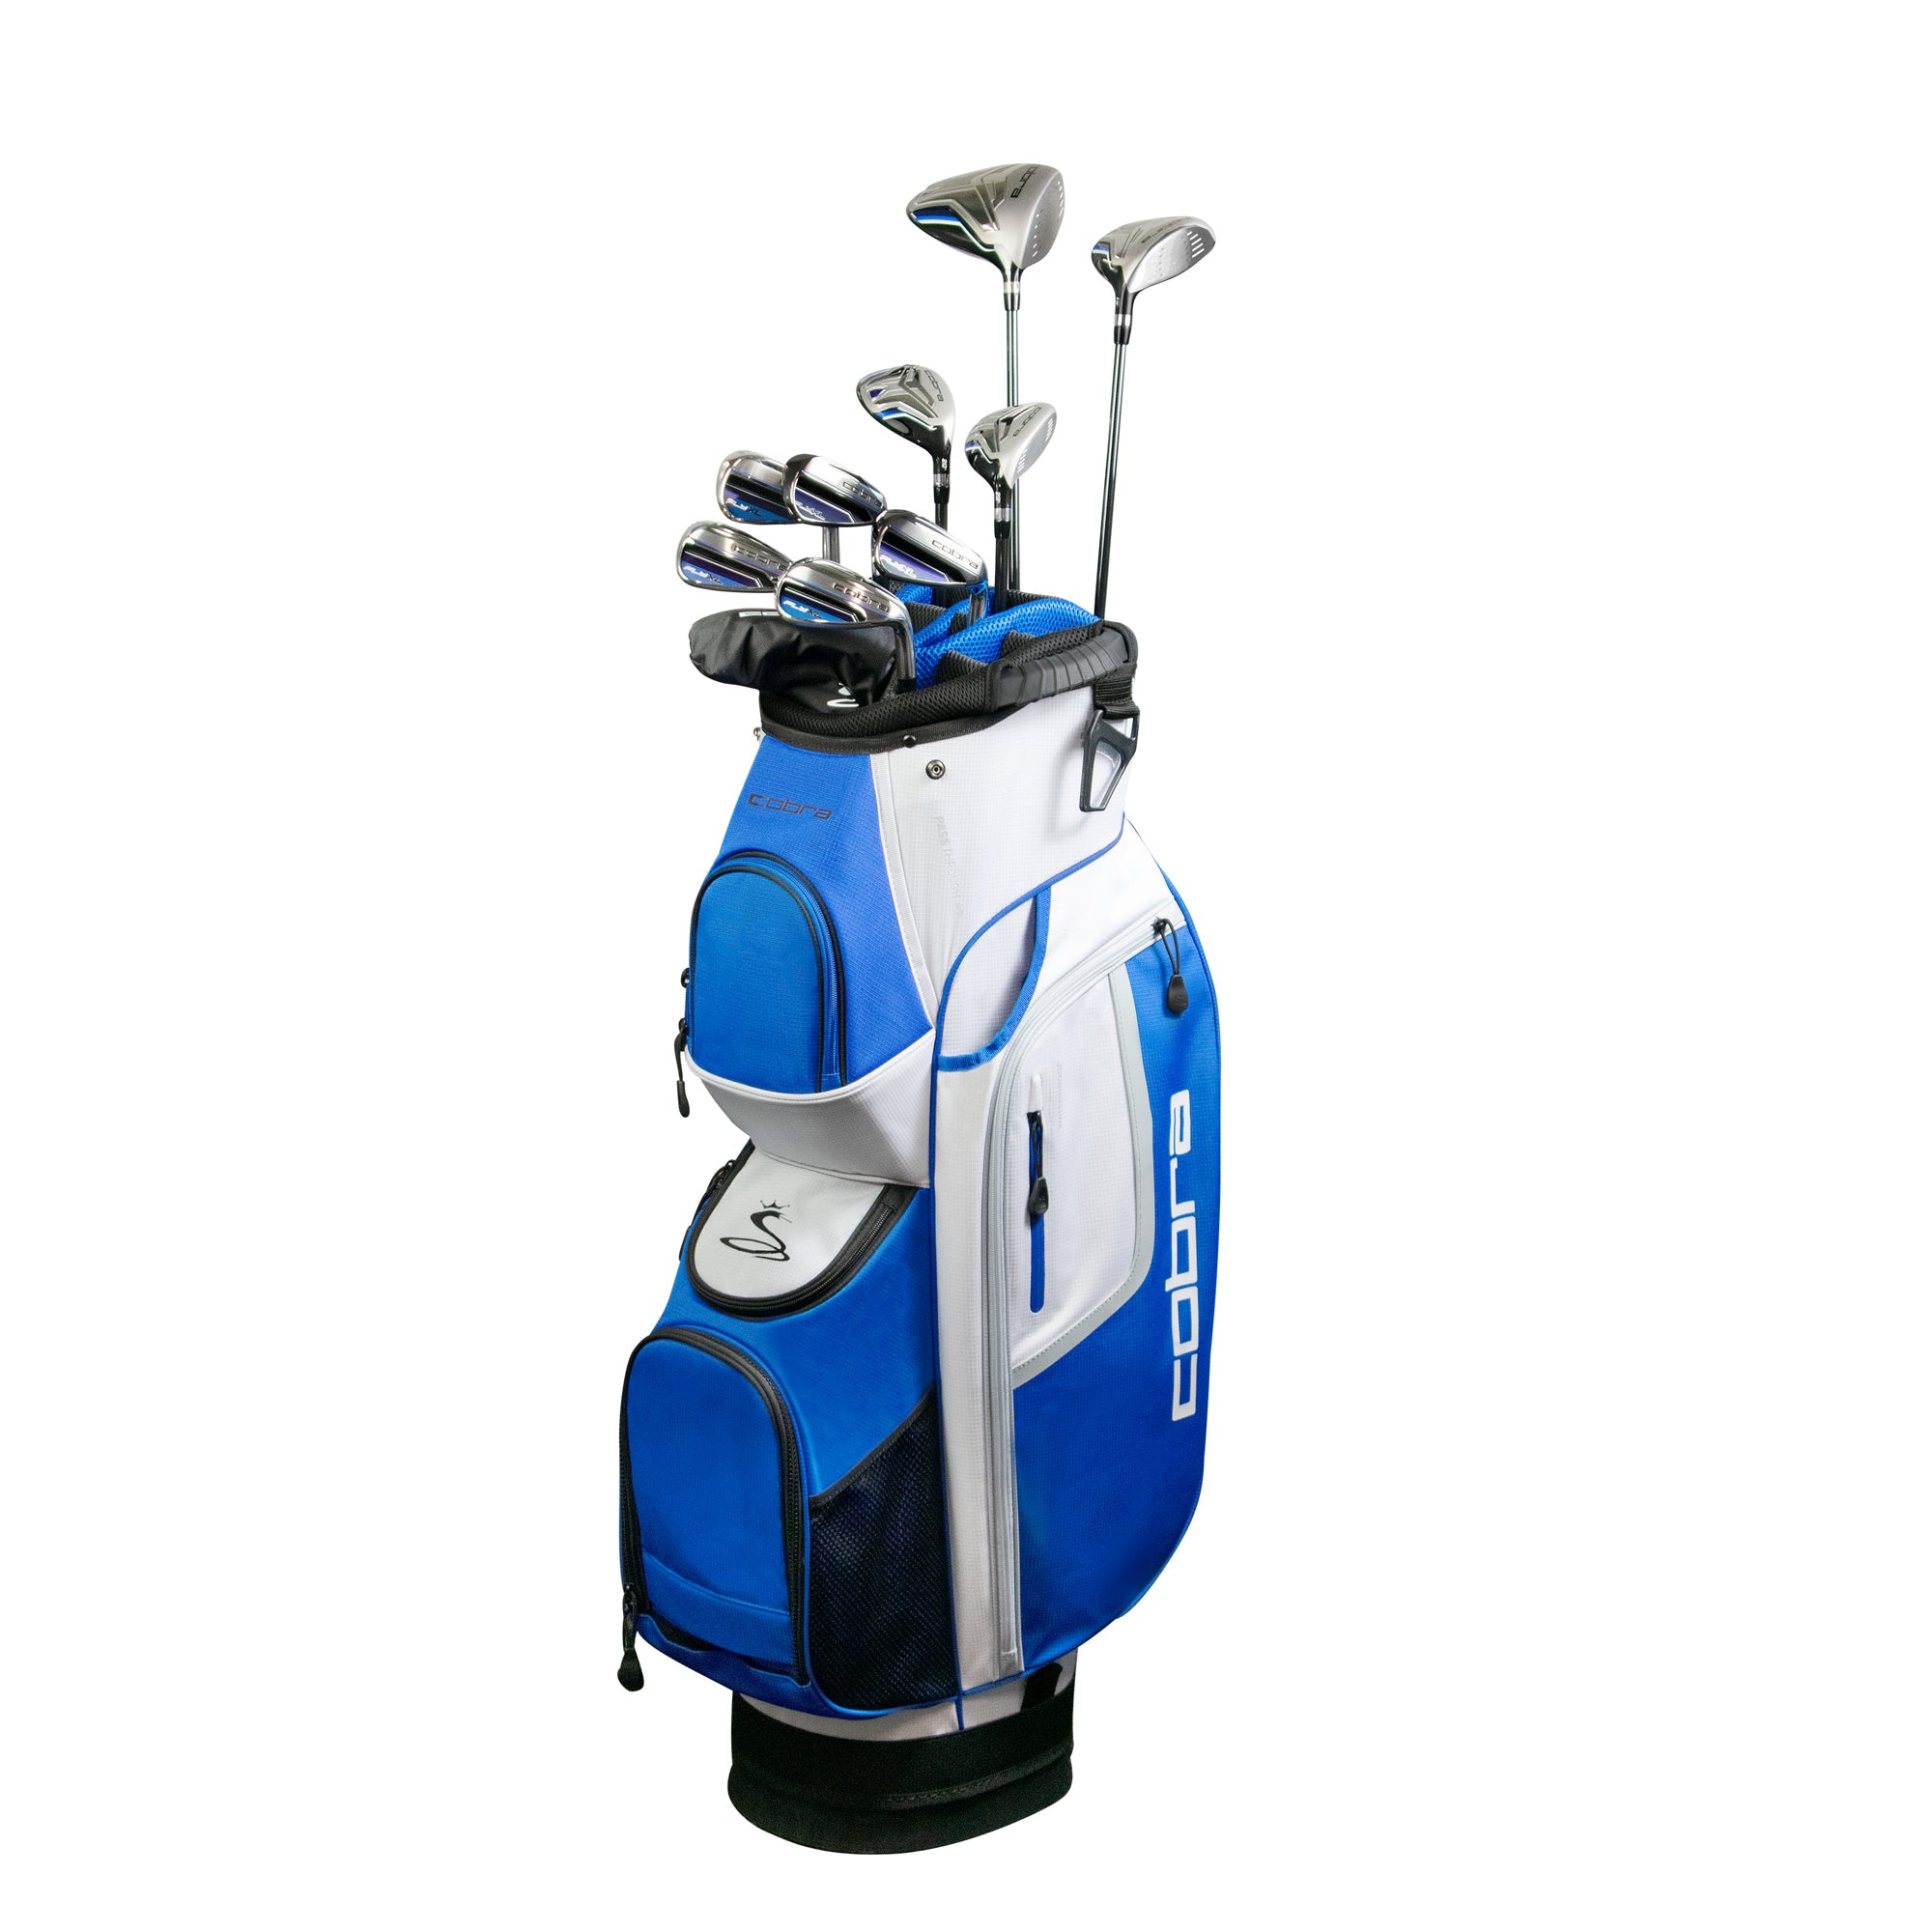 Golf - Choosing Golf Clubs To Fit Your Game